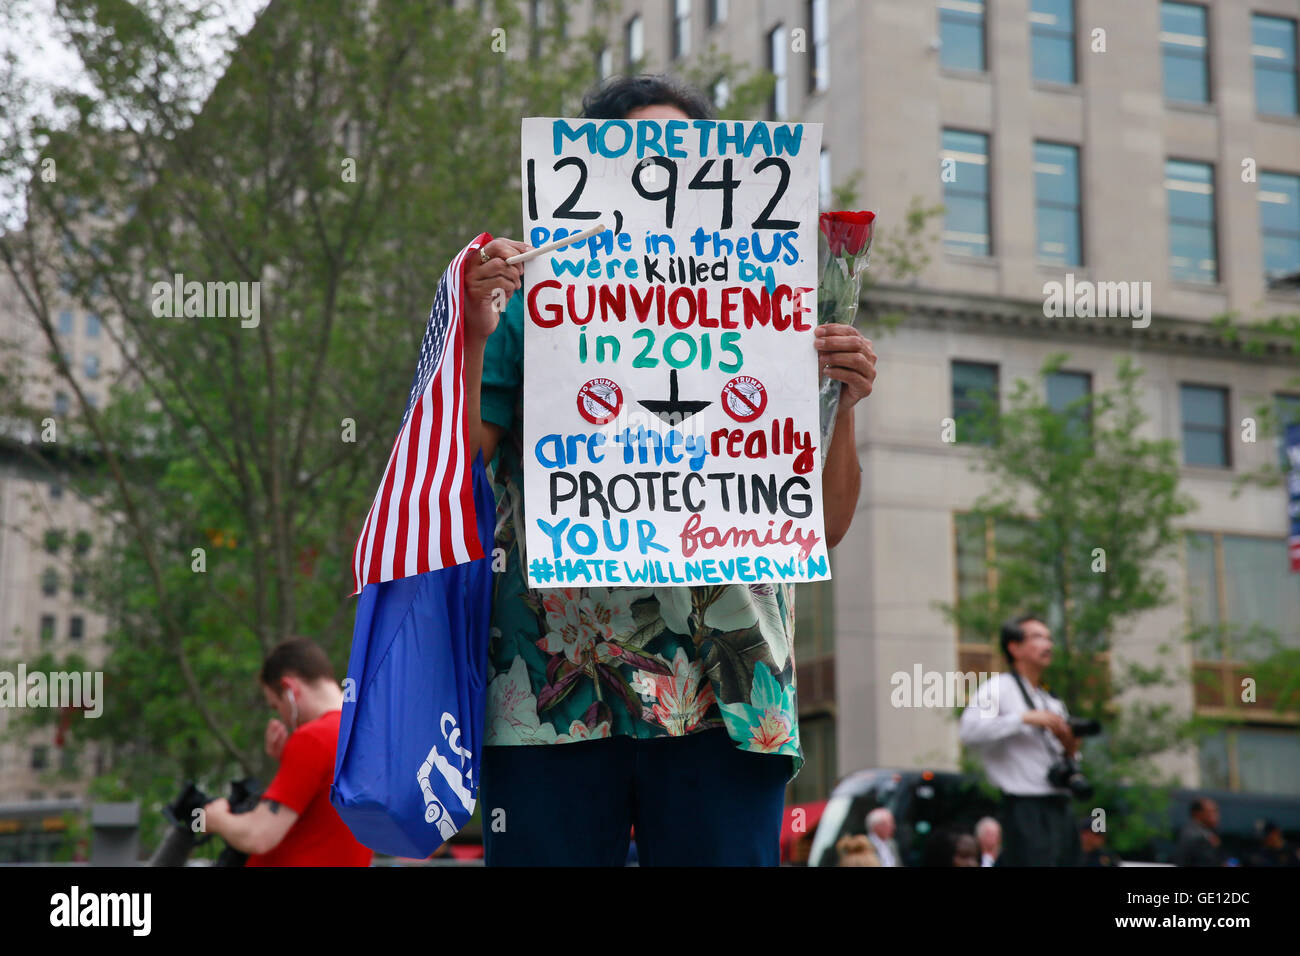 07212016 - Cleveland, Ohio, USA:  A protester holds an anti gun sign on the final day of the 2016 Republican National Convention in downtown Cleveland. (Jeremy Hogan) Stock Photo